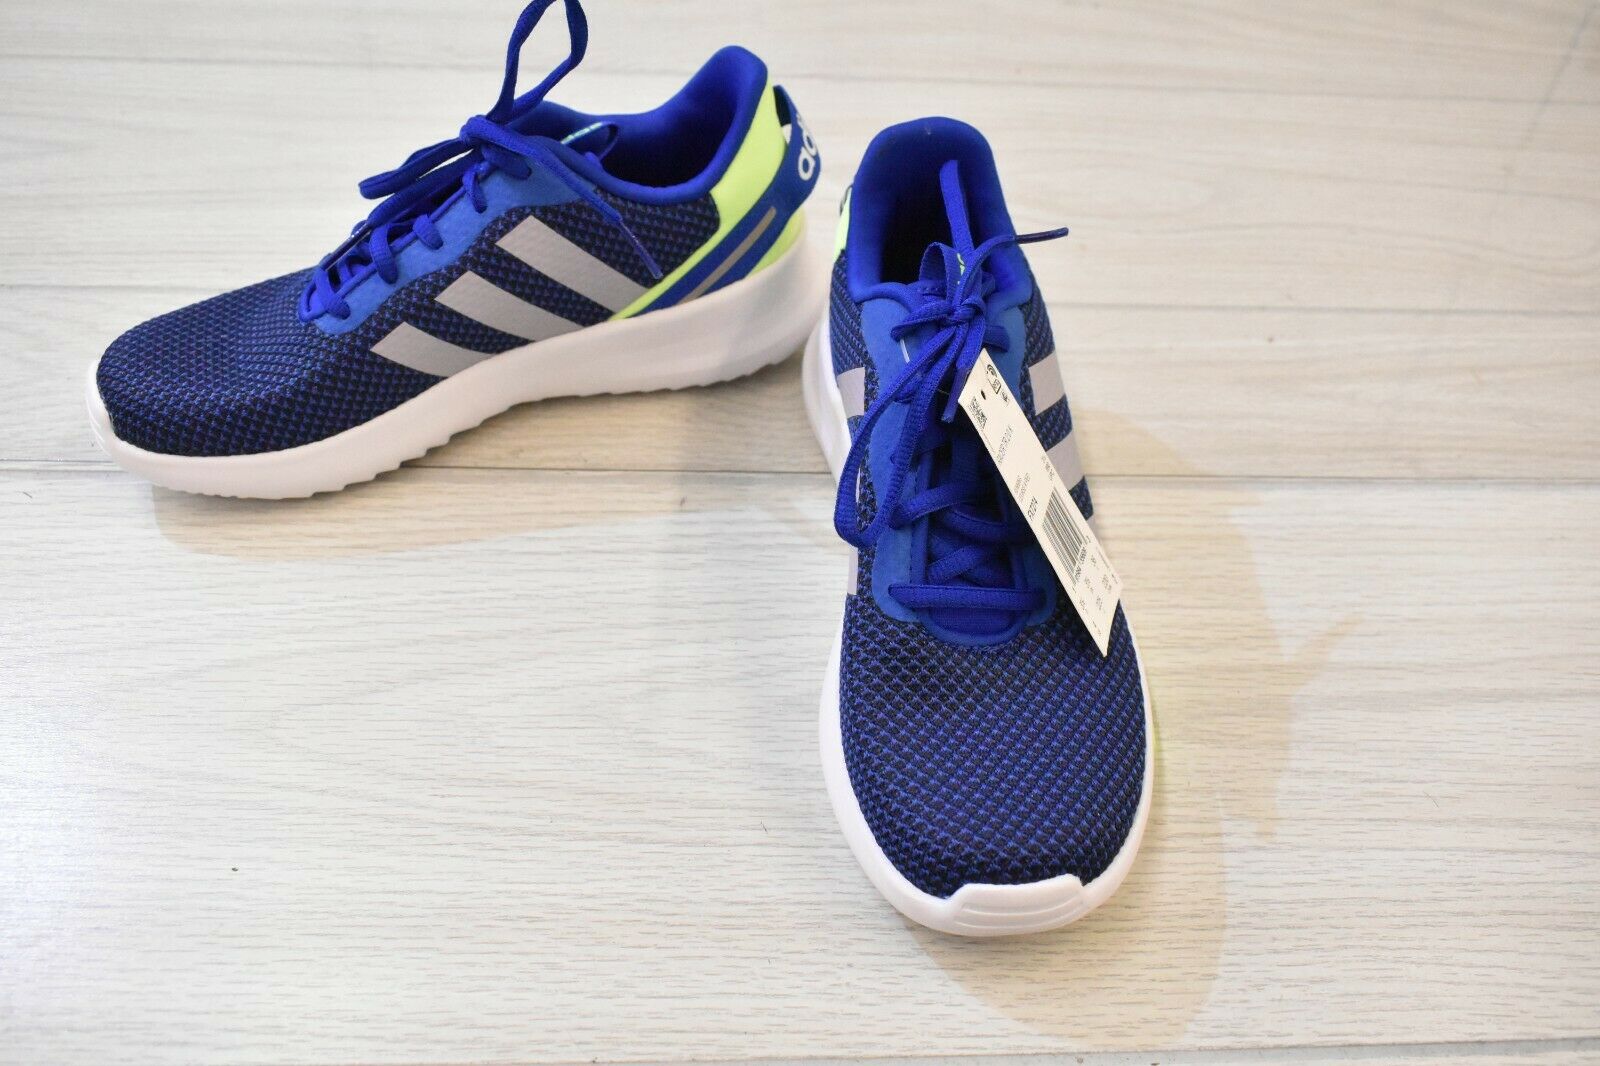 adidas Racer TR 2.0 Running Shoes, Big Boys Size 4, Blue MSRP $55